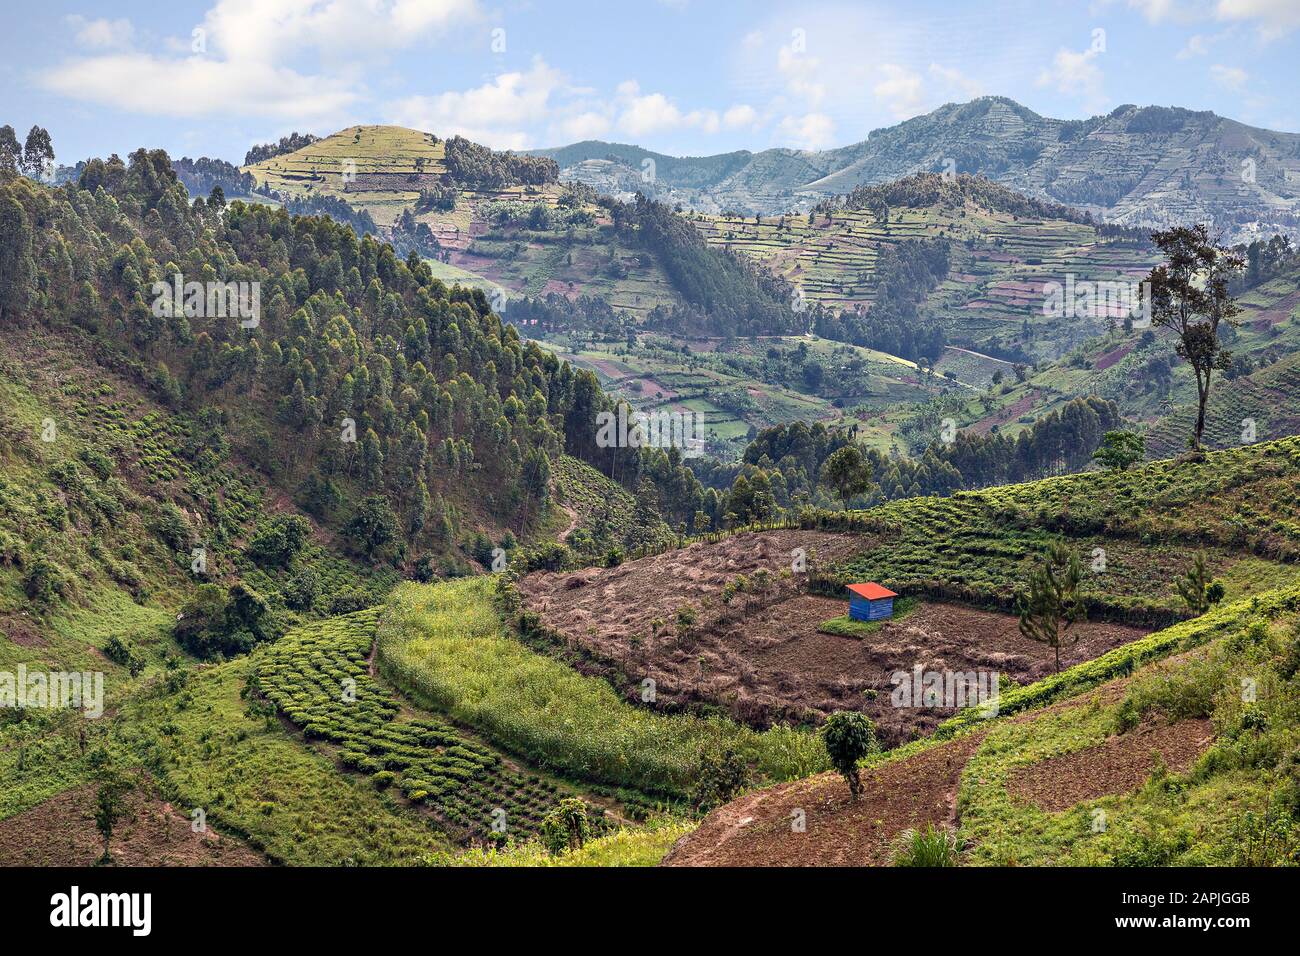 Tea plantation and agricultural terraces in Uganda, Africa Stock Photo